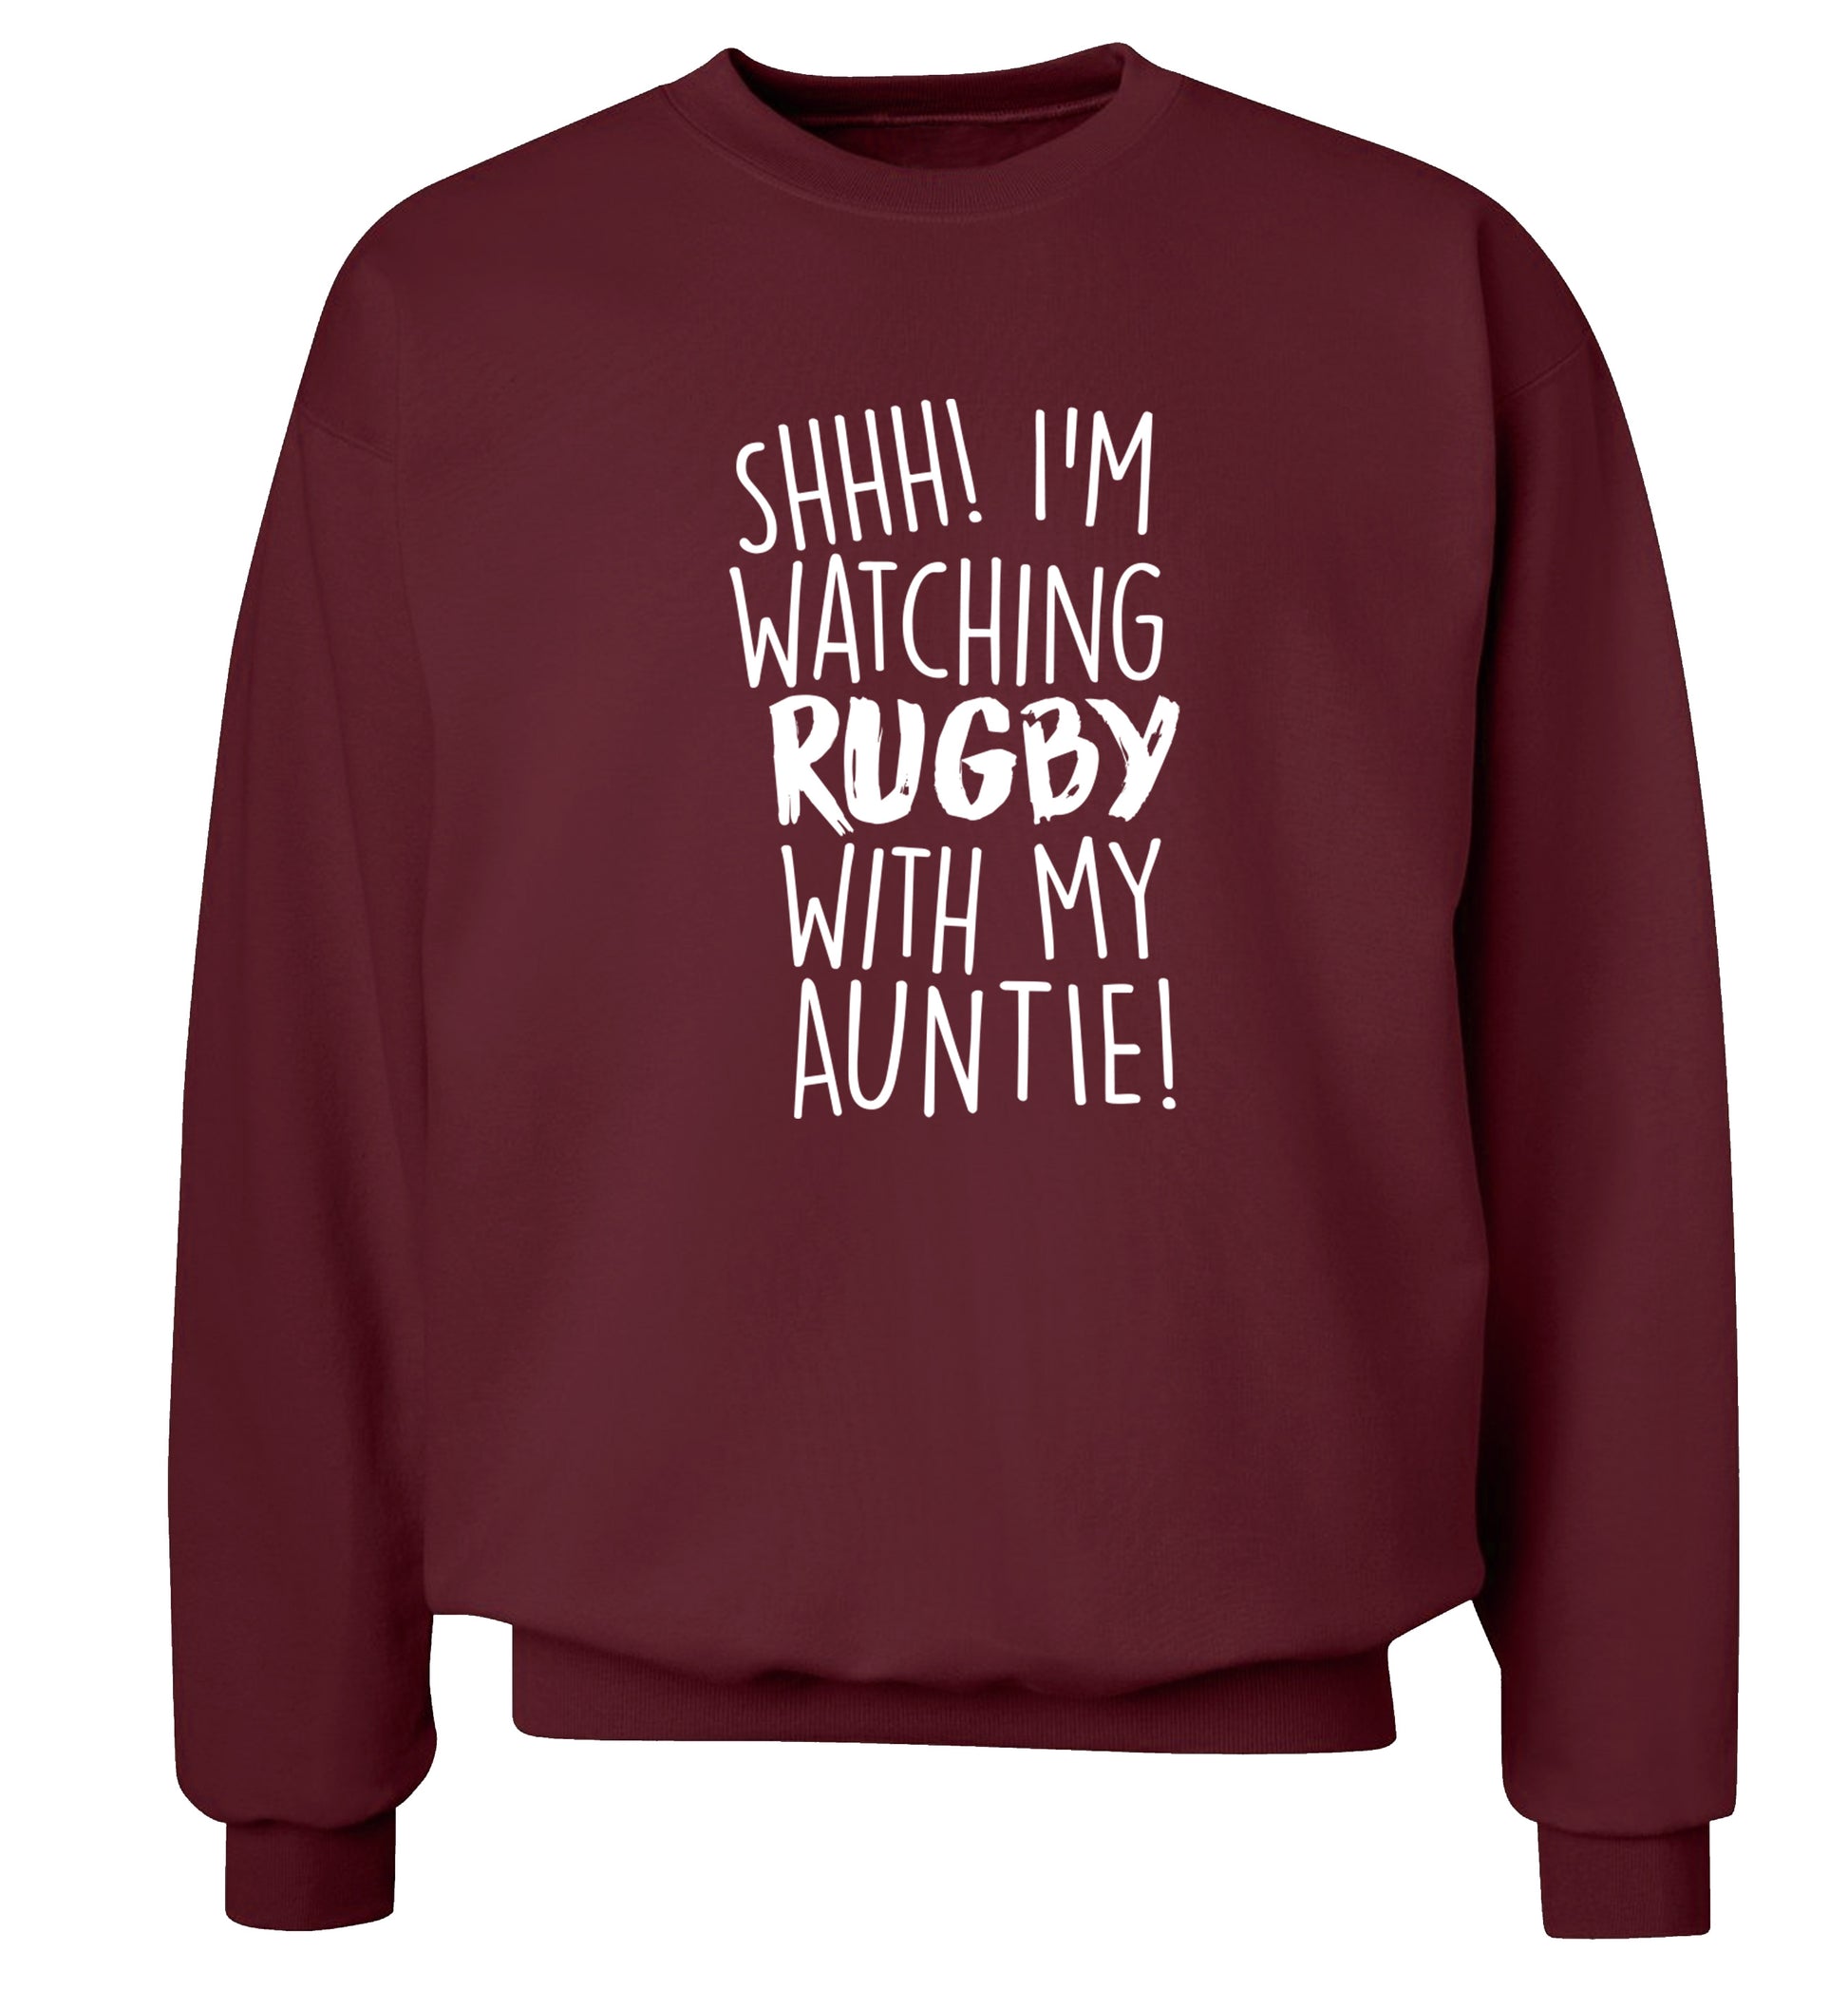 Shhh I'm watchin rugby with my auntie Adult's unisex maroon Sweater 2XL